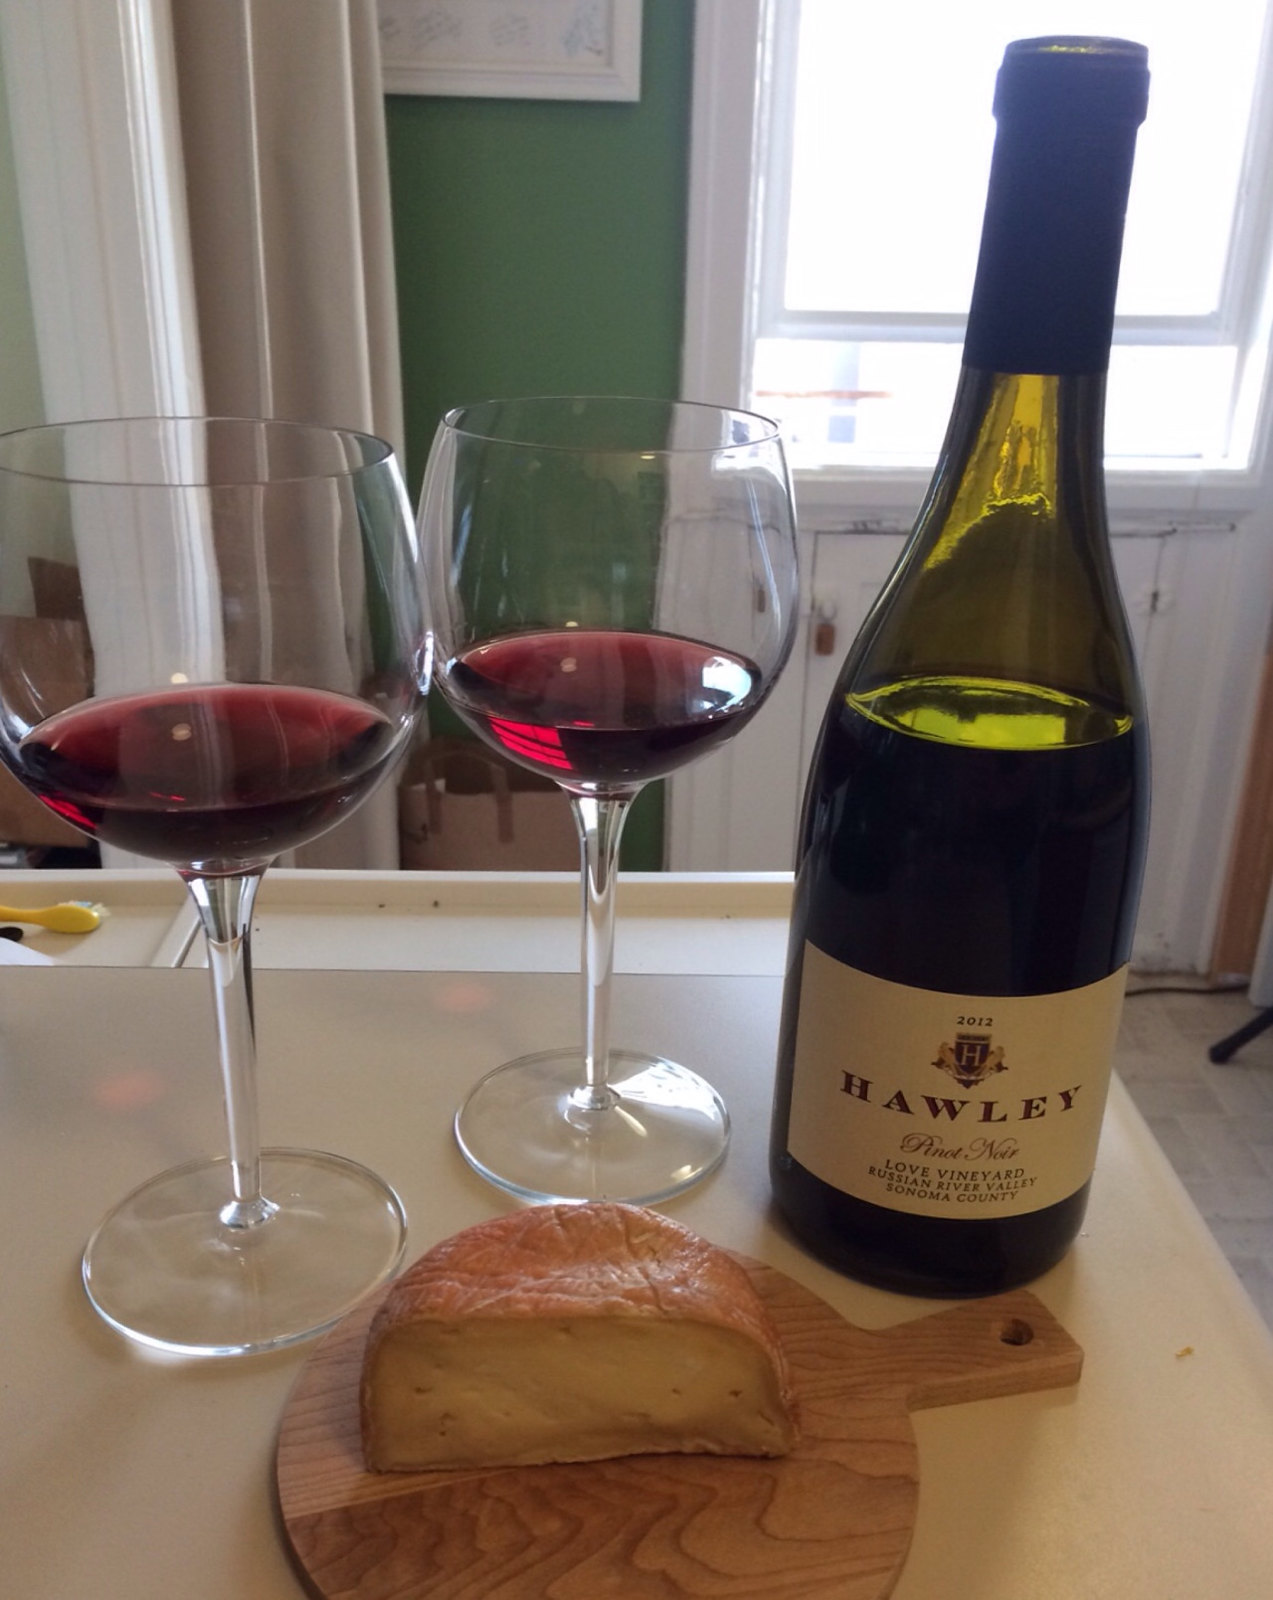 Hawley Pinot Noir and Red Hawk 1